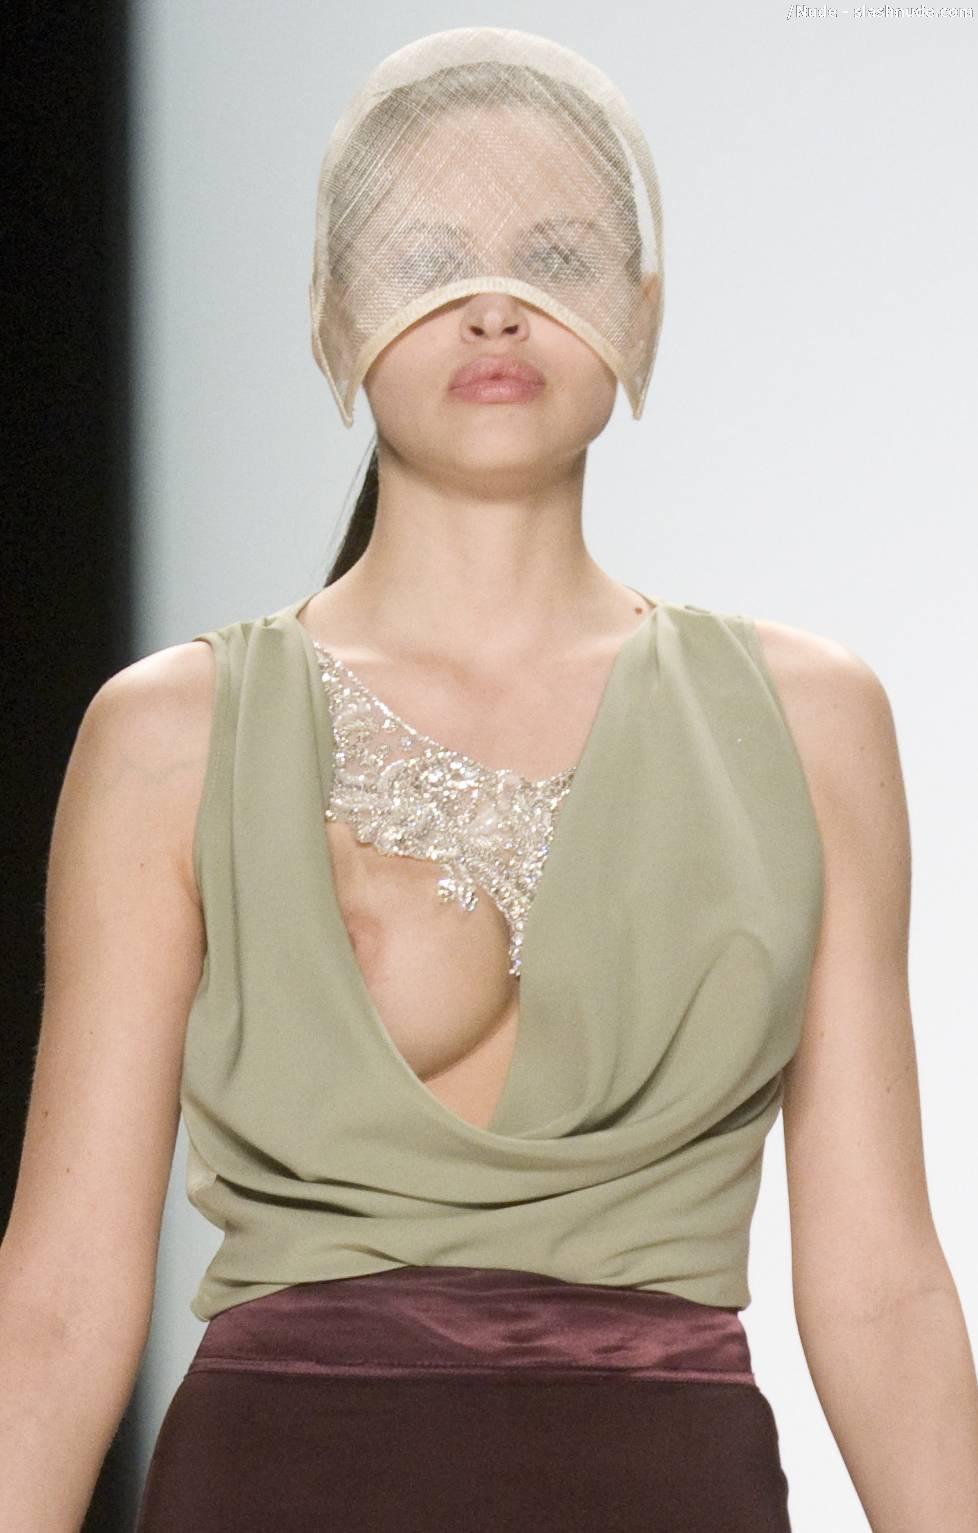 Hana Nitsche Breast Slips Out Of Her Top On Runway 2